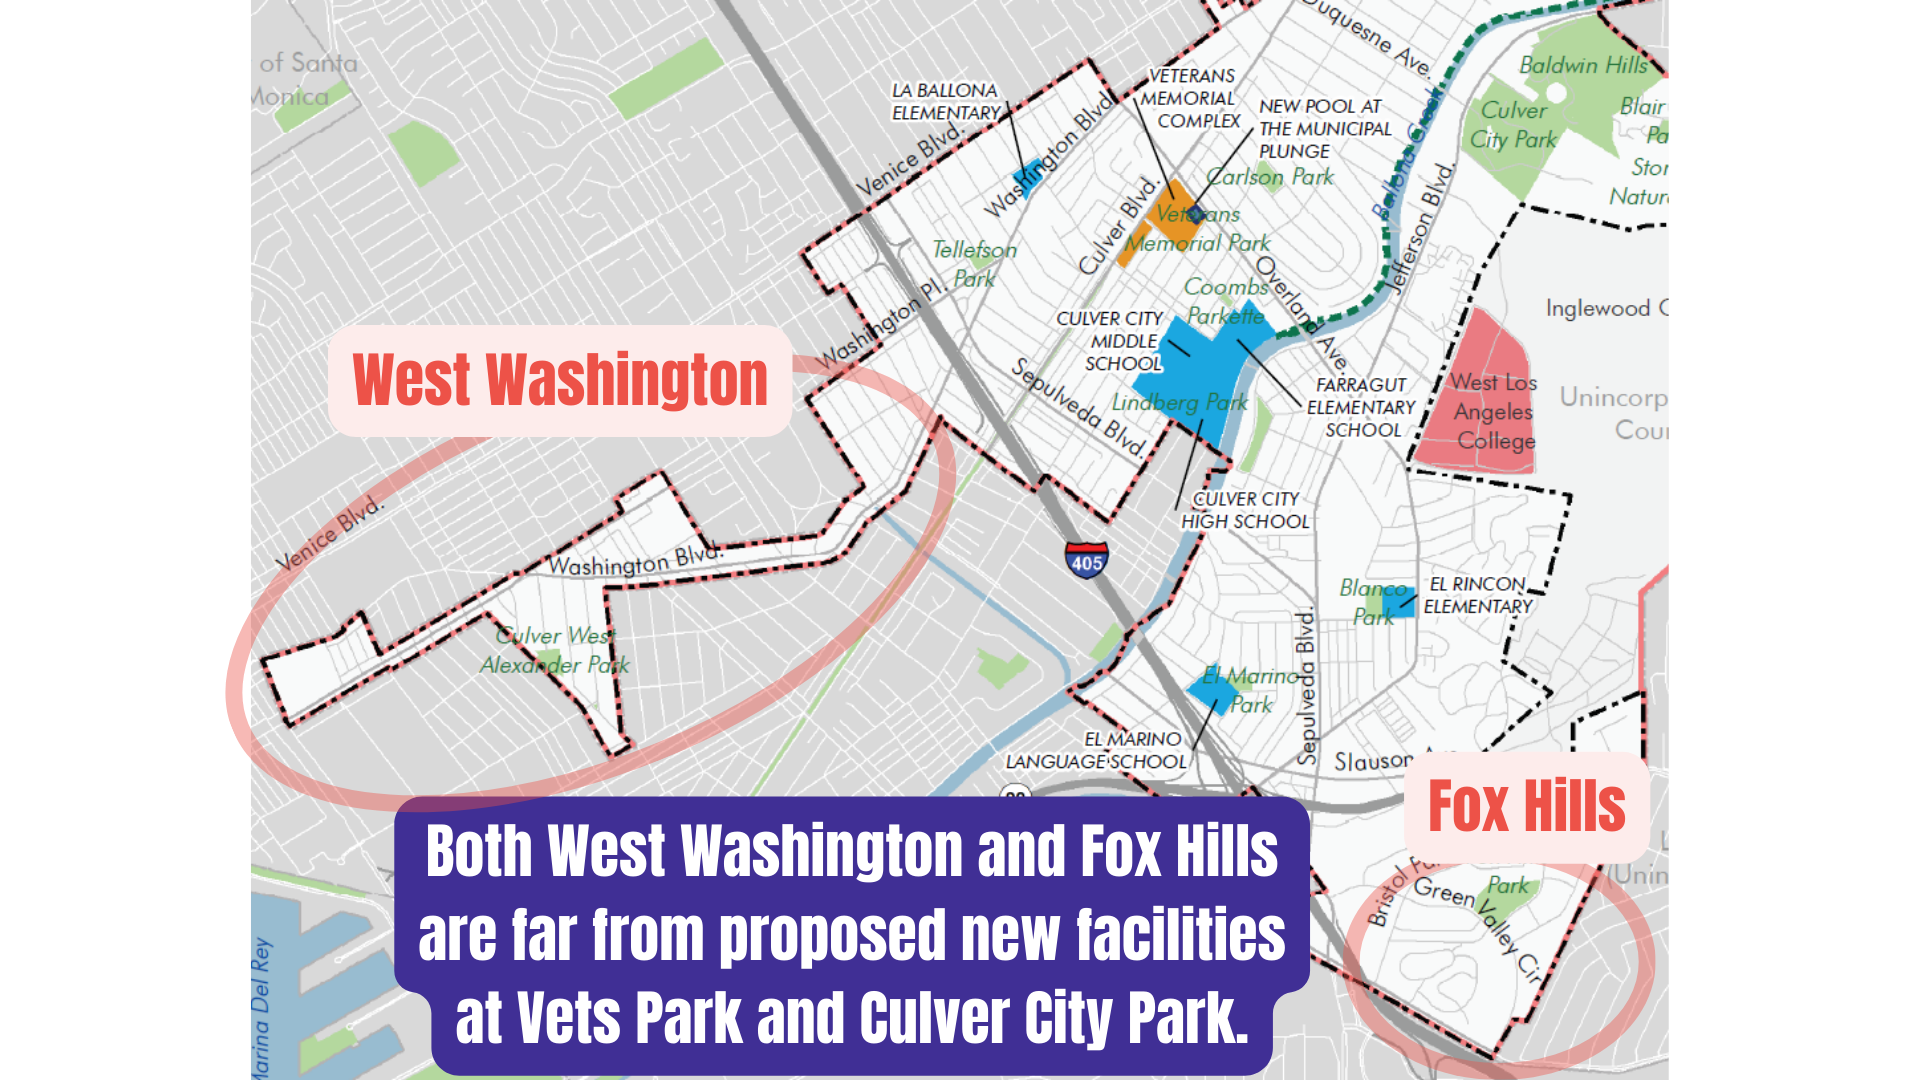  Both West Washington and Fox Hills are far from proposed new facilities at Vets Park and Culver City Park. 